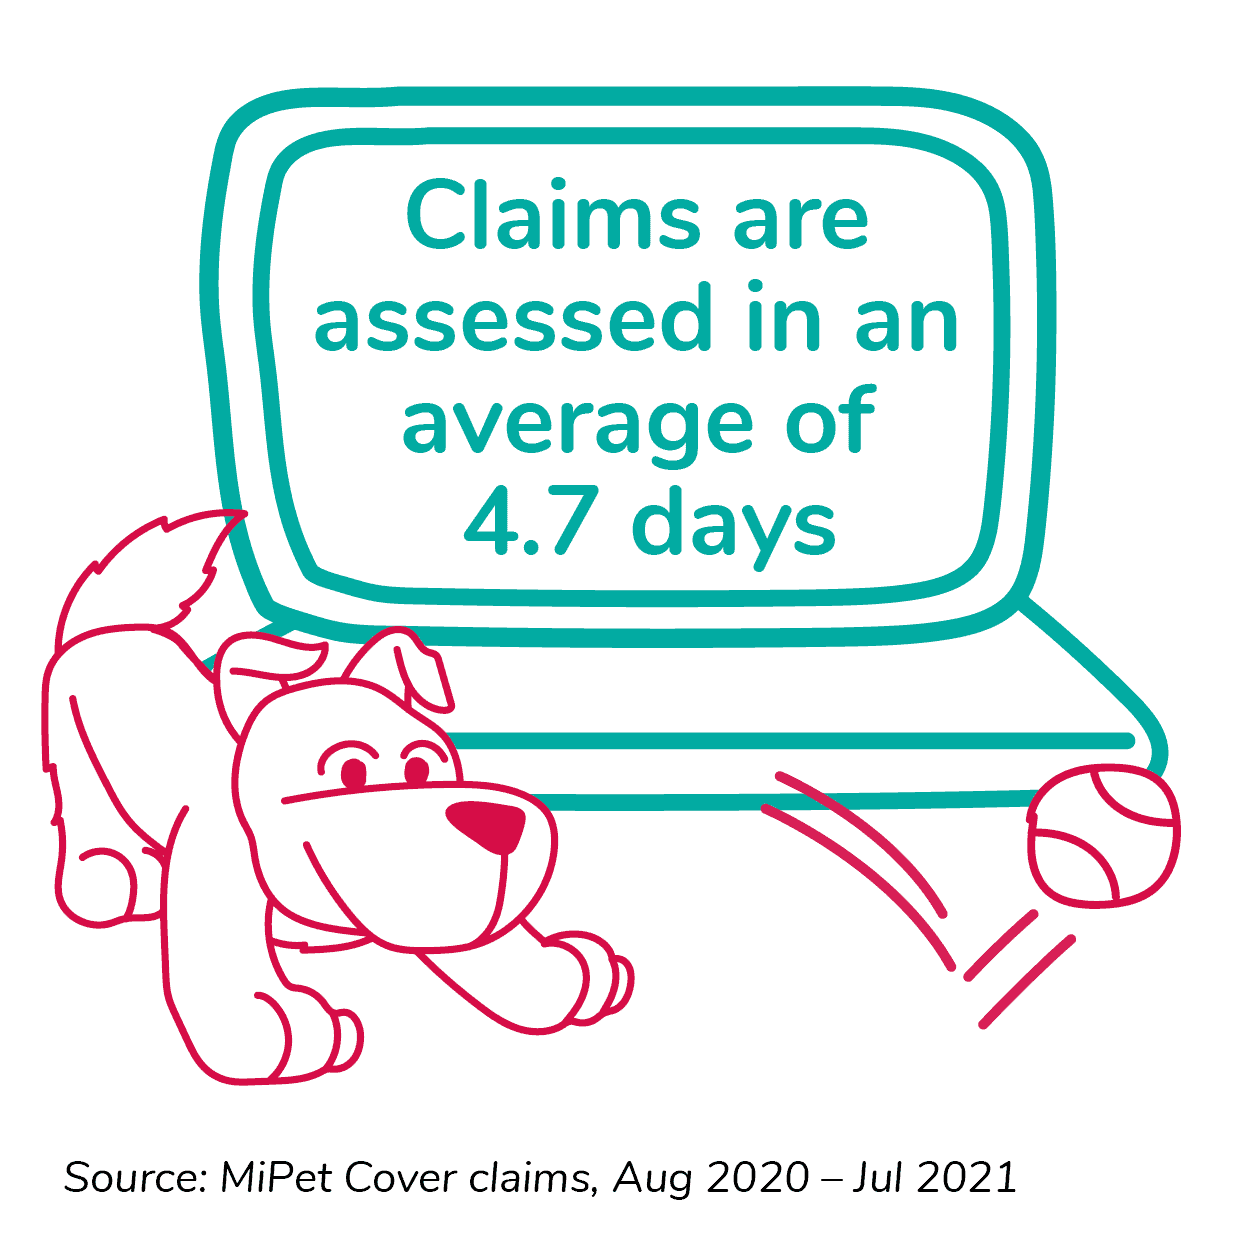 Claims are paid usually within 4.7 days